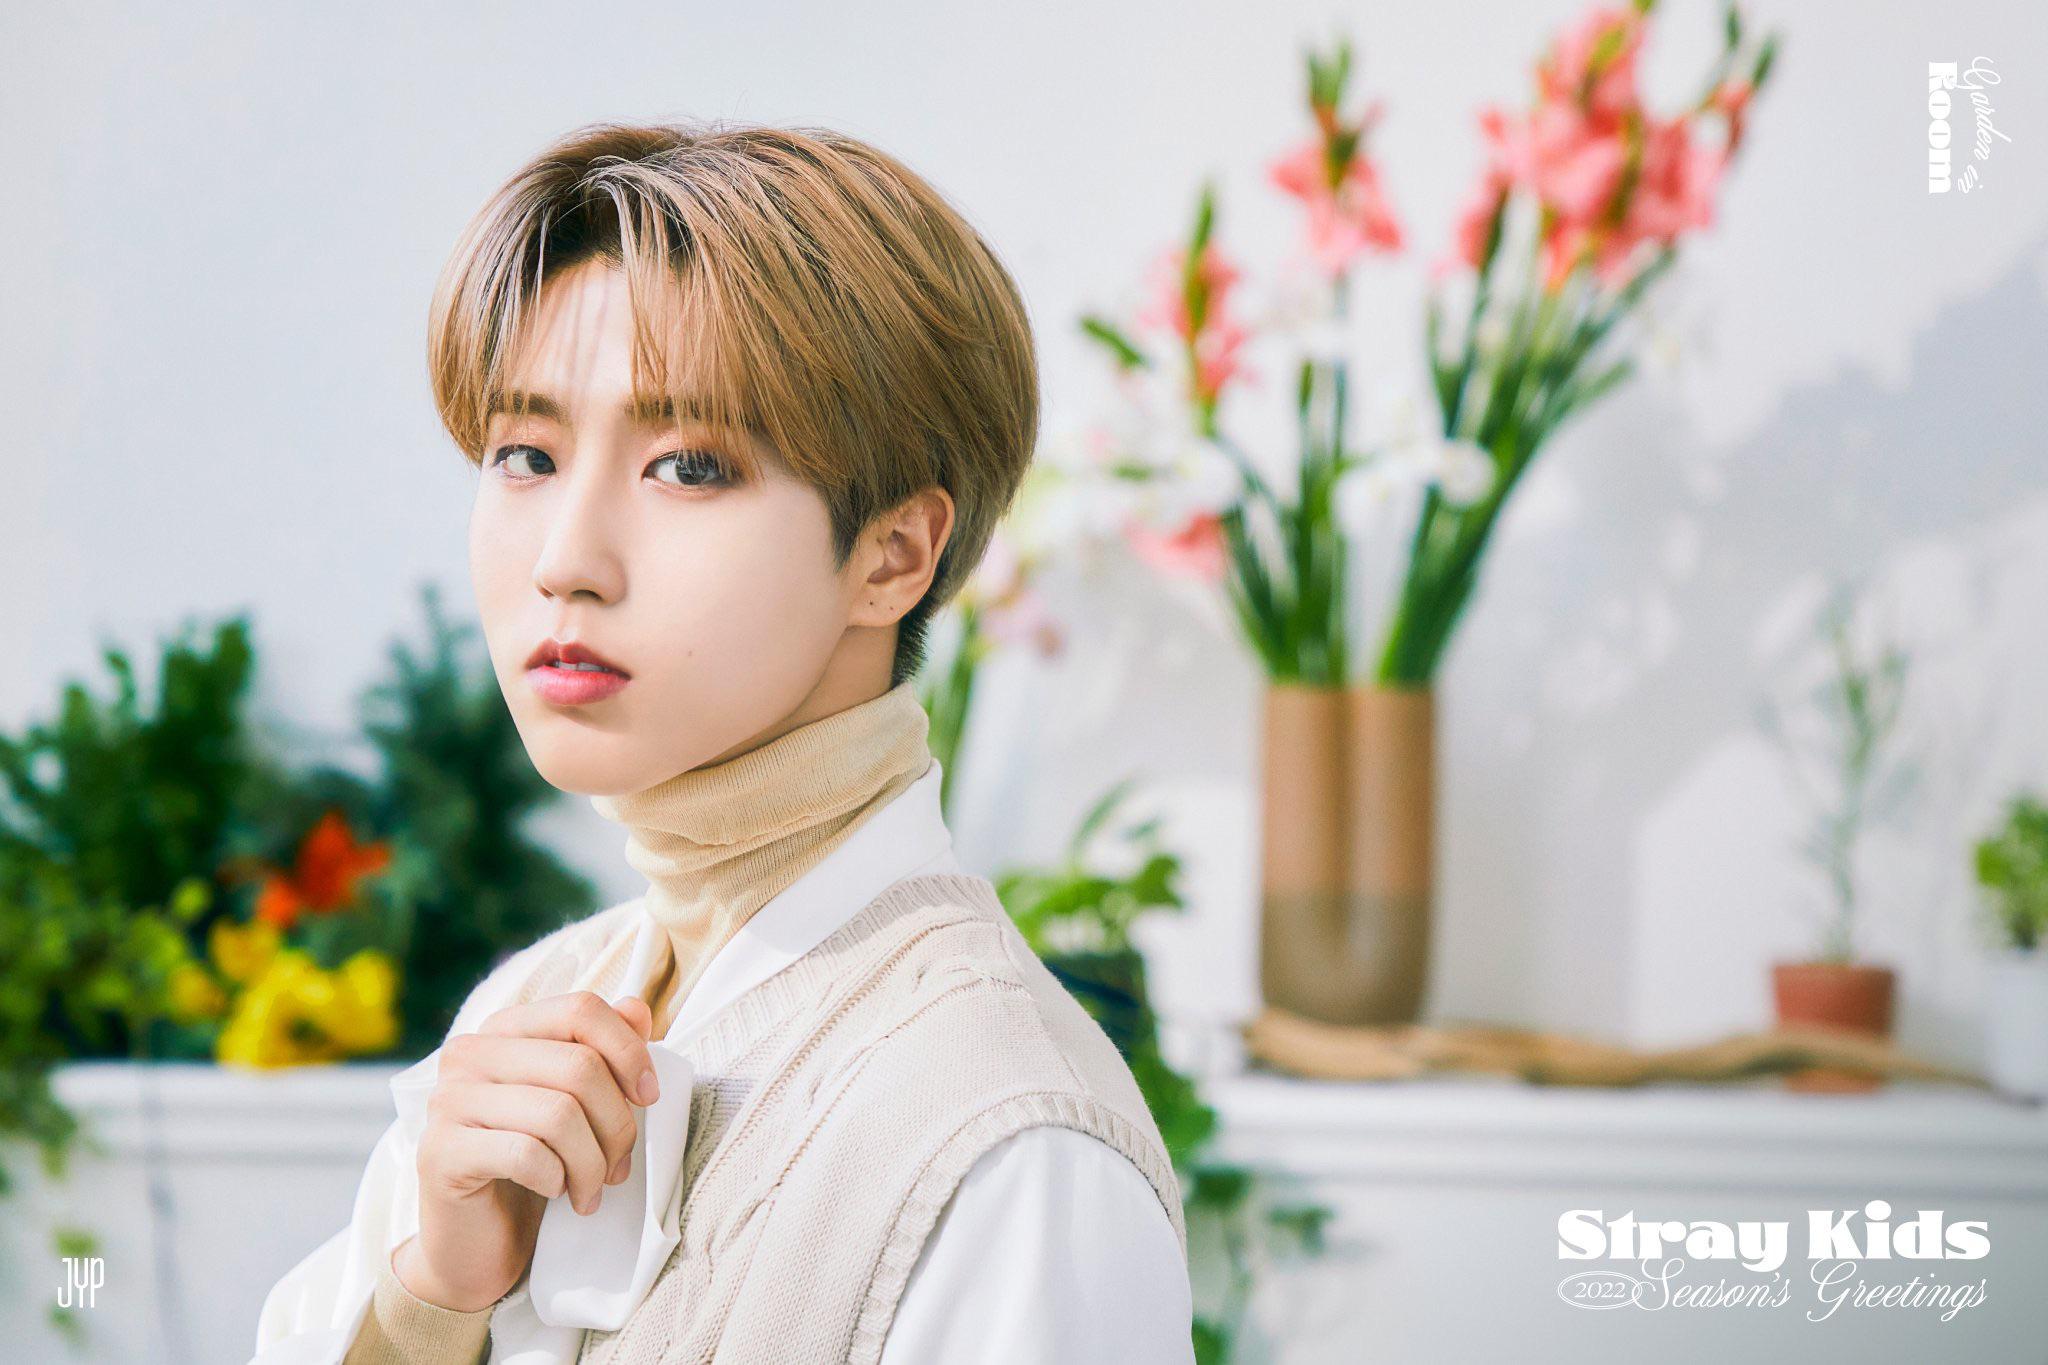 Kpop Stray Kids Wallpapers HD High Quality 